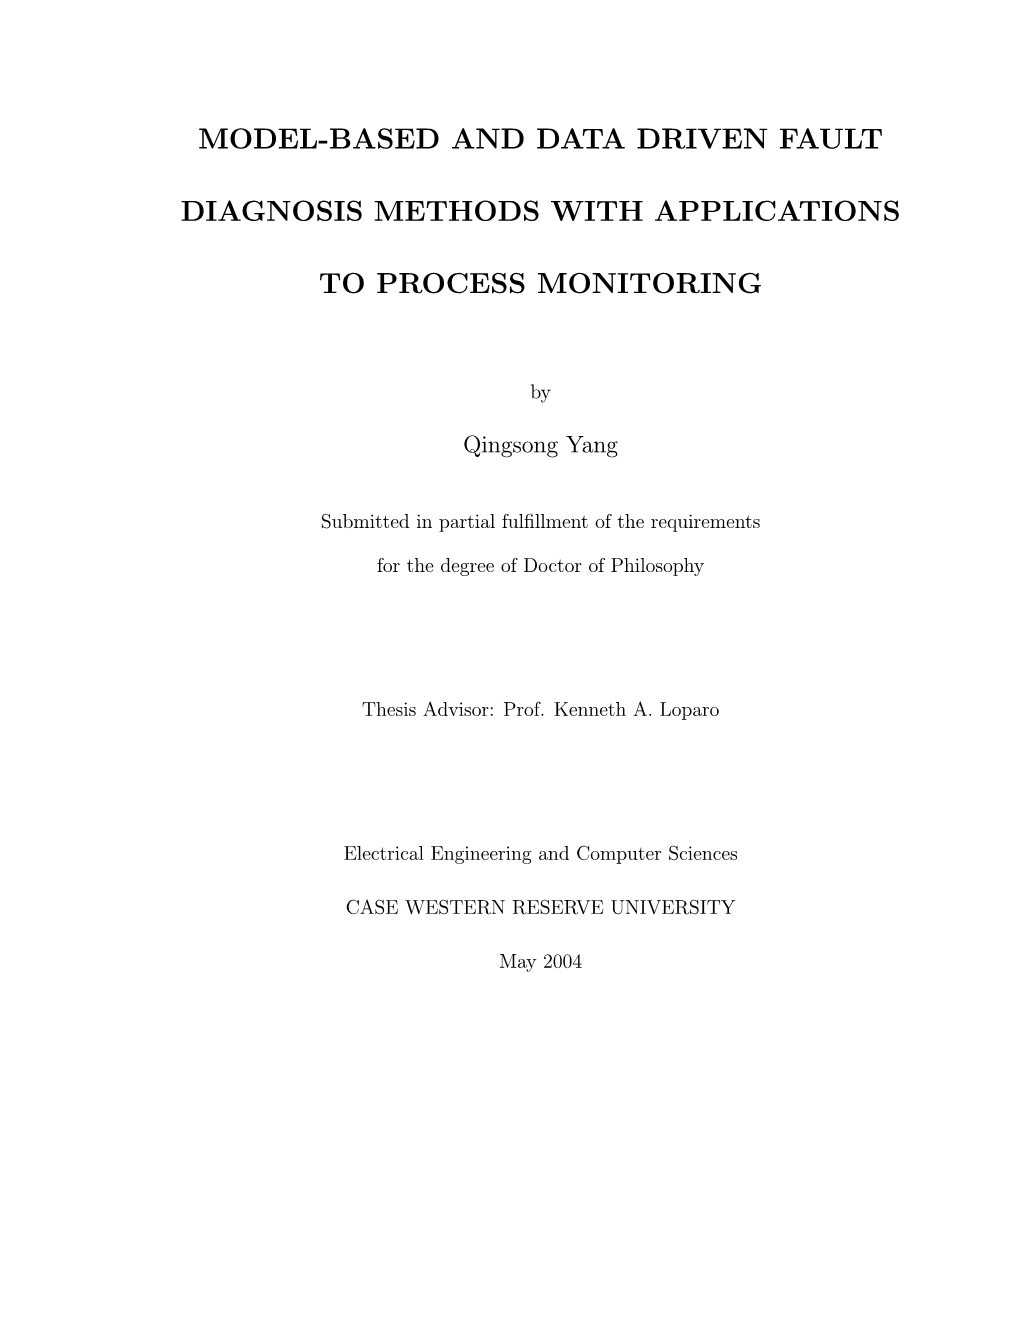 Model-Based and Data Driven Fault Diagnosis Methods with Applications to Process Monitoring